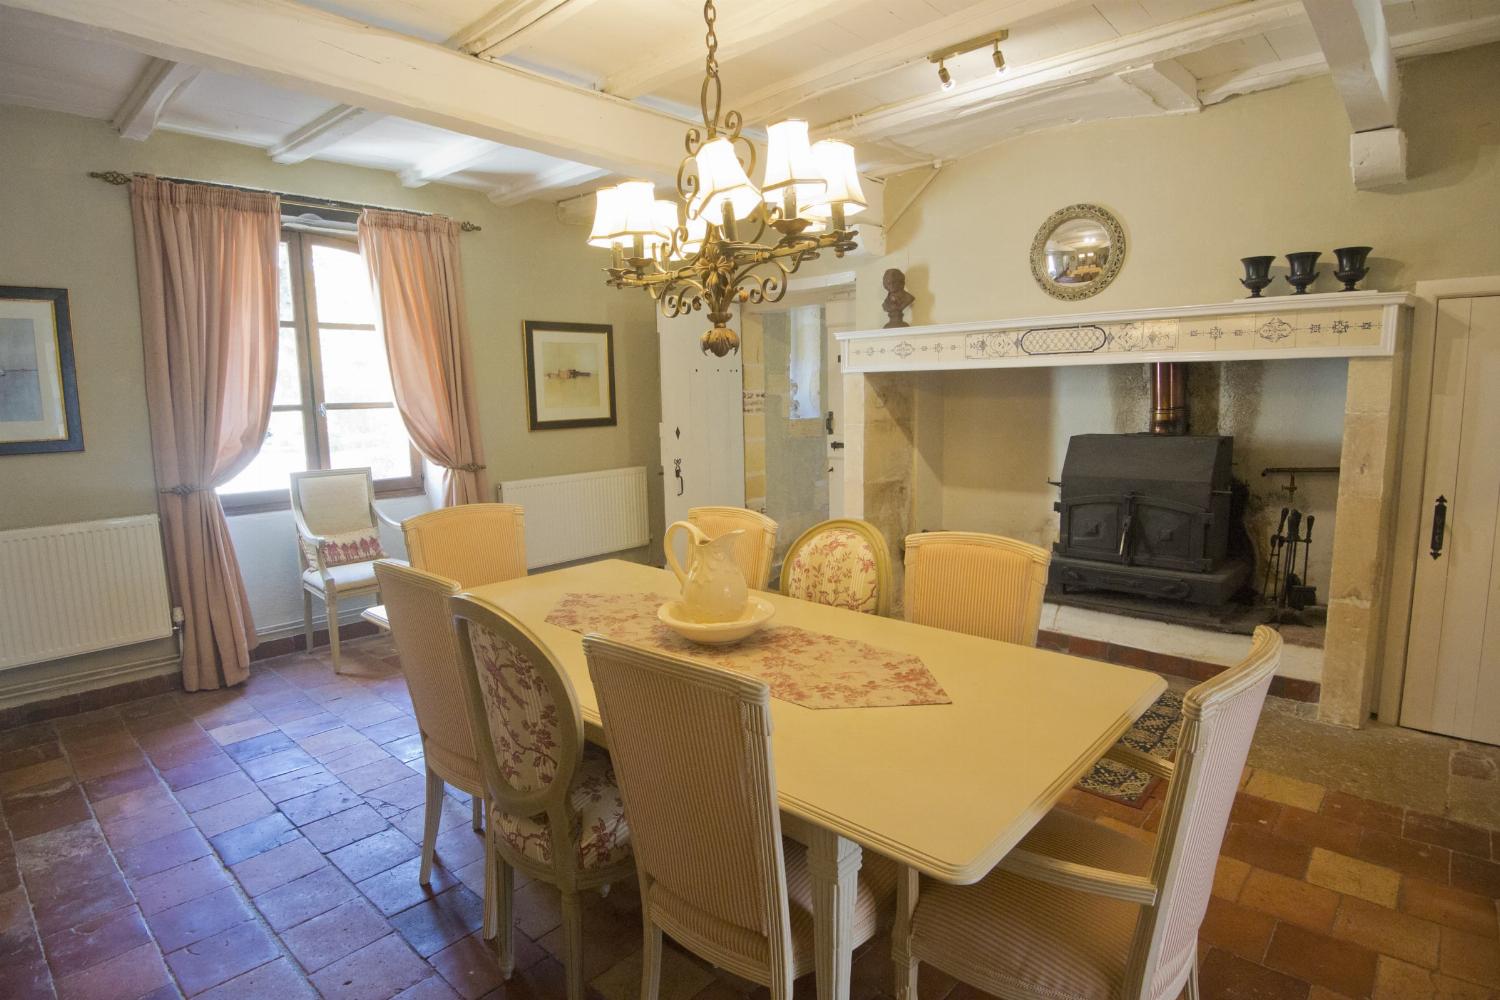 Dining room | Rental home in Nouvelle-Aquitaine